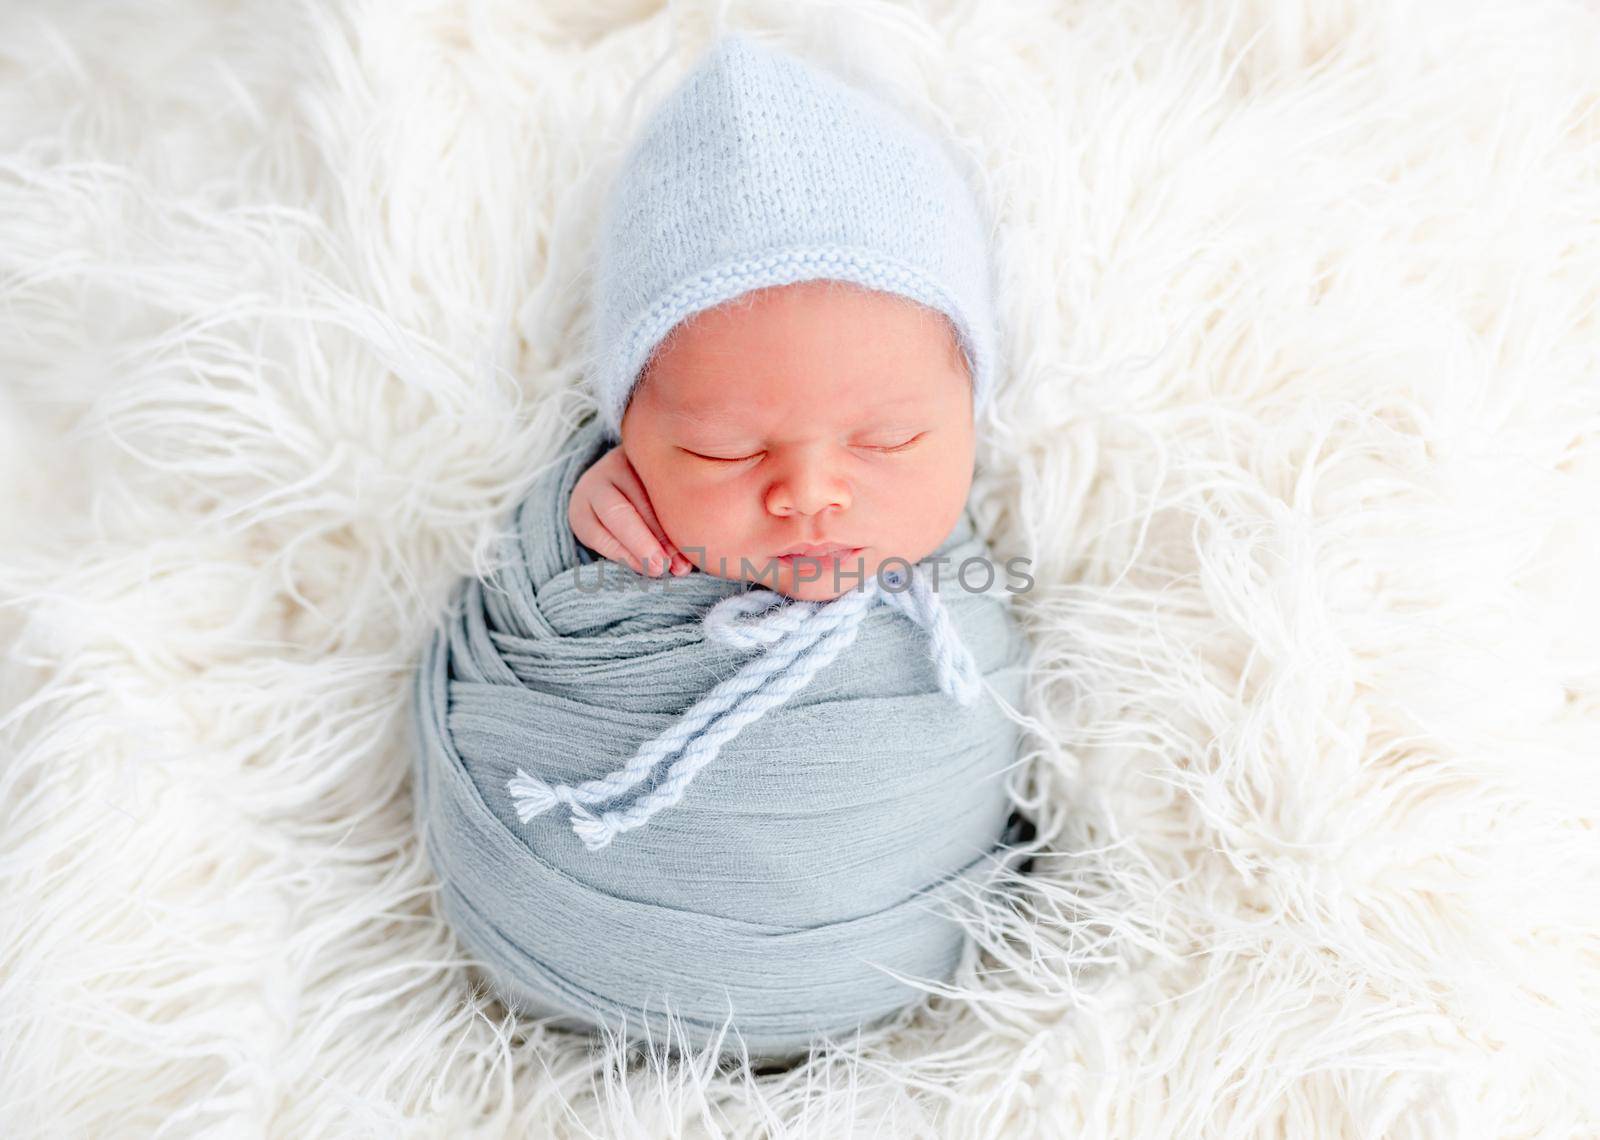 Portrait of newborn baby boy swaddled in light blue fabric and wearing knitted hat sweet sleeping on white fur. Adorable infant child napping